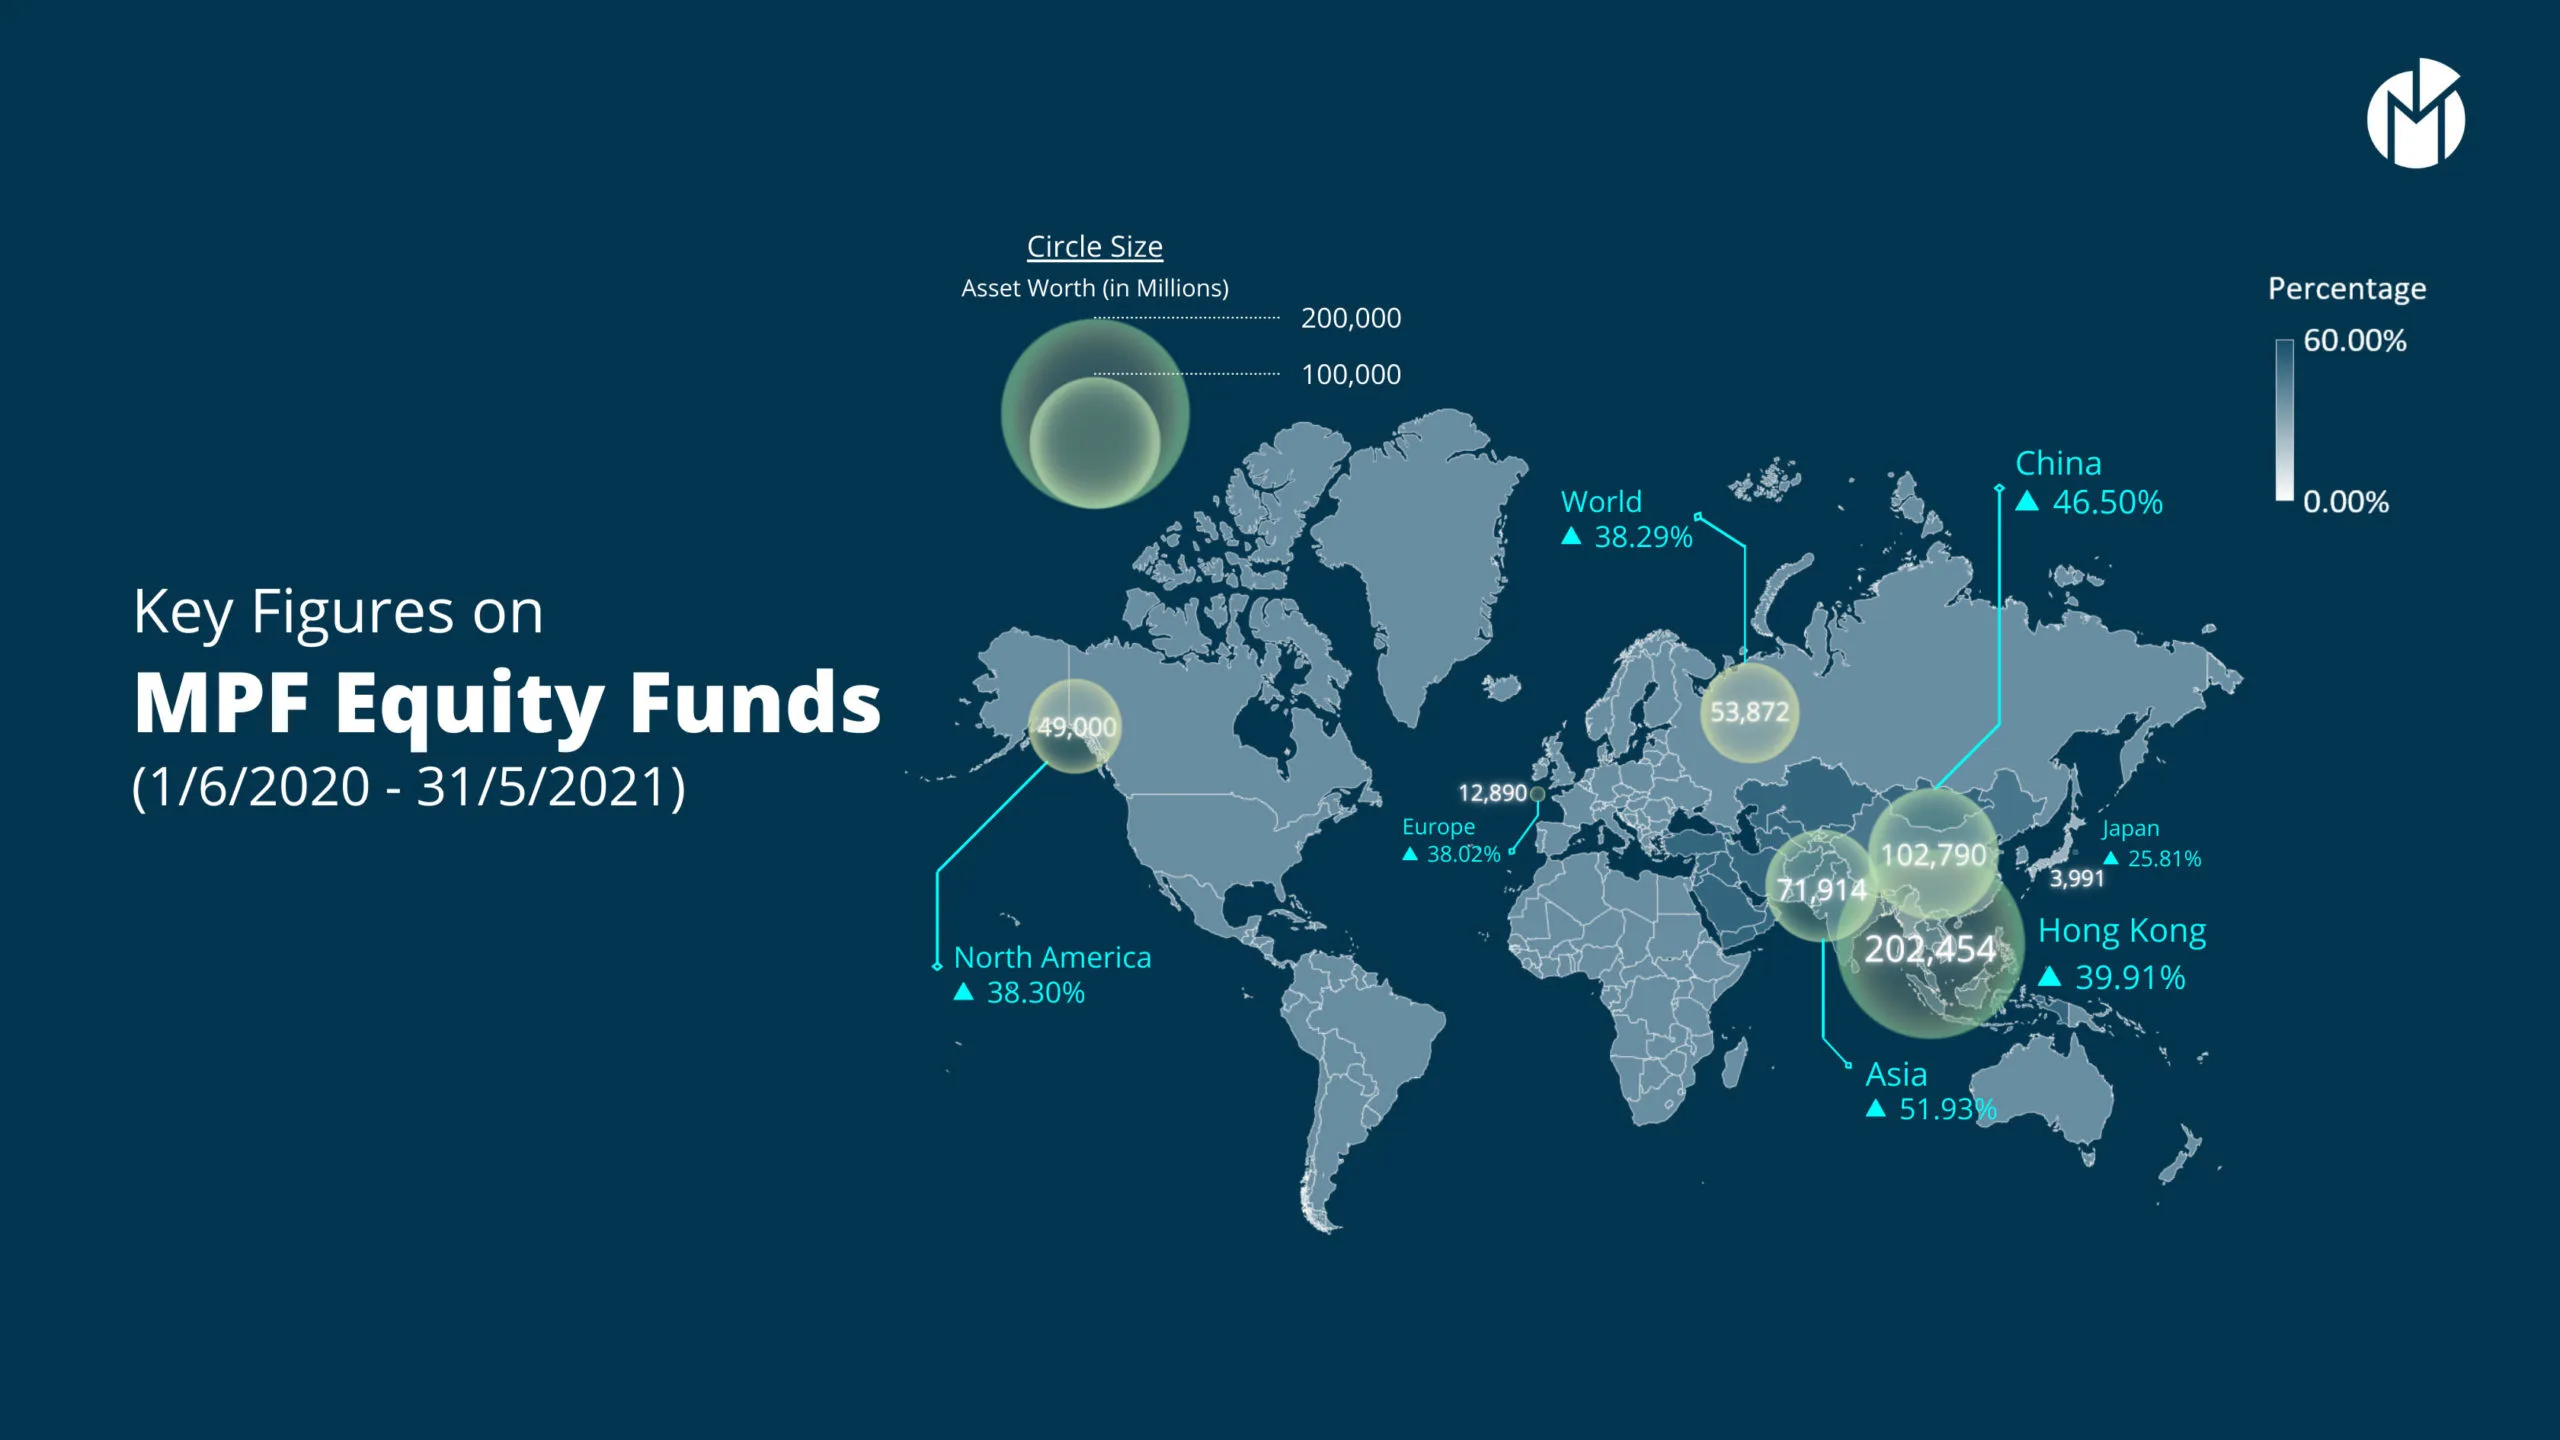 The fund size and the performance of the MPF investing in different regions